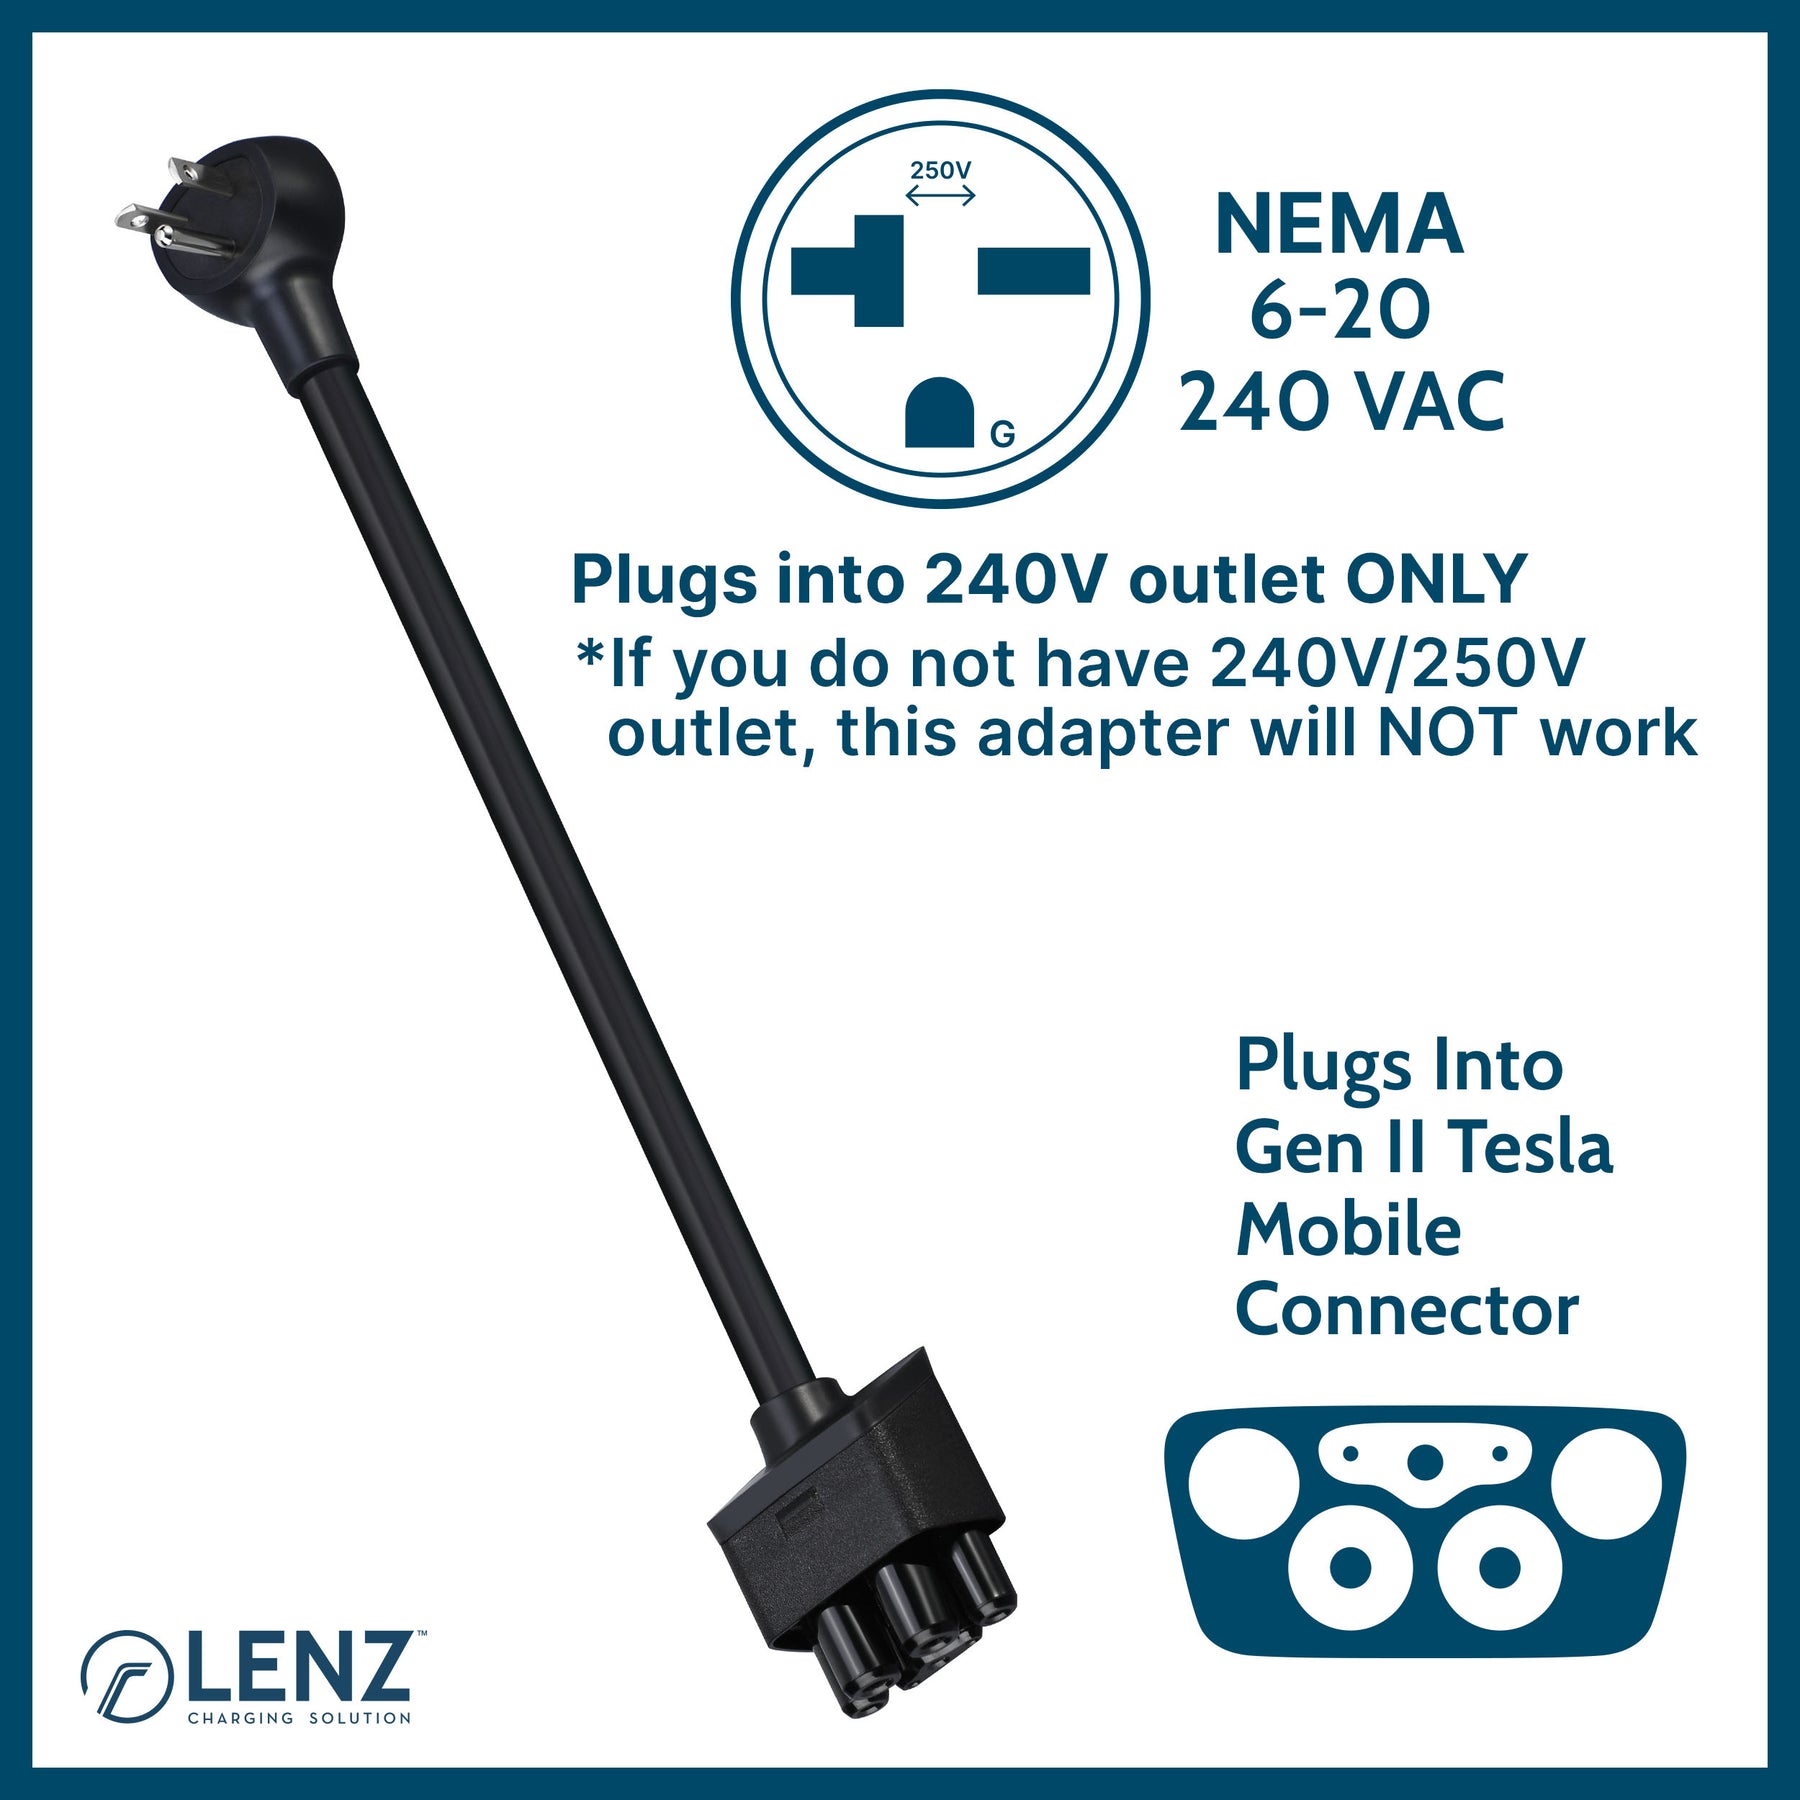 LENZ 6-20 NEMA Adapter plugs into 240v 6-20 type outlet and connects to Gen 2 Tesla Mobile Connector